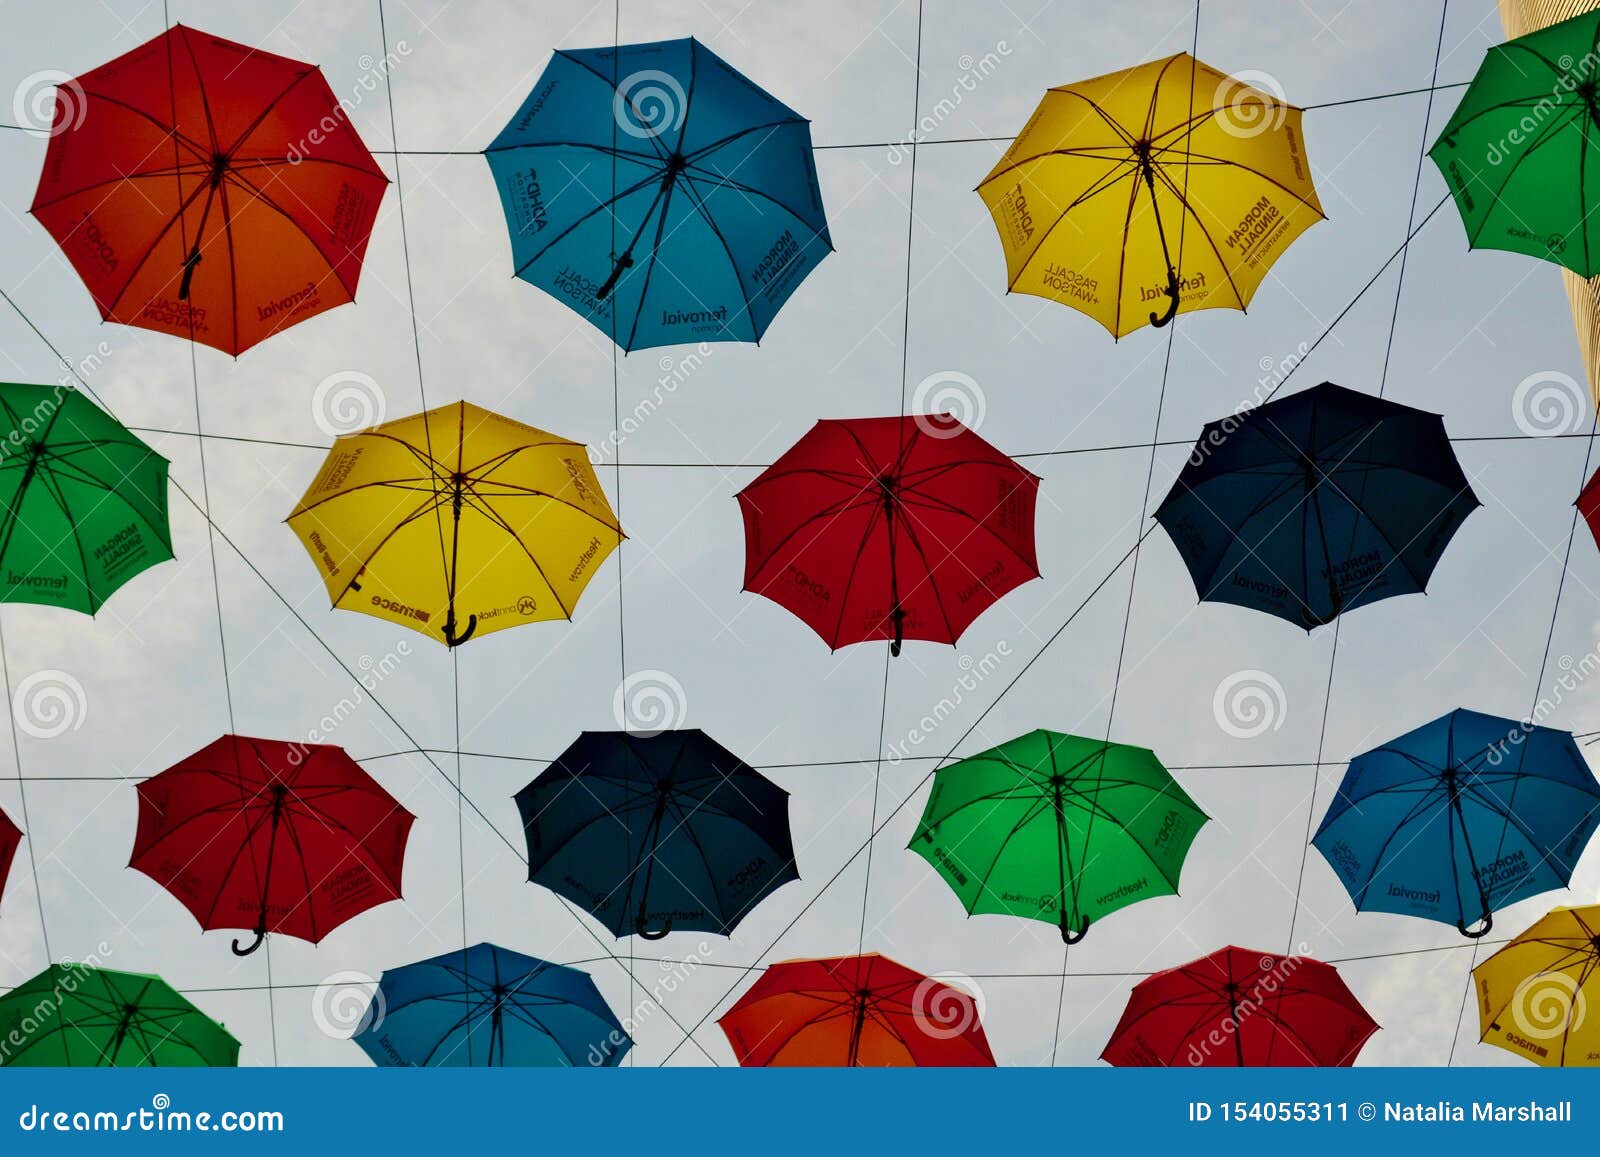 Heathrow Airport London Uk 21 Jul 19 The Umbrella Project At The Airporta S T5 Arrivals Editorial Photo Image Of Architecture Airport